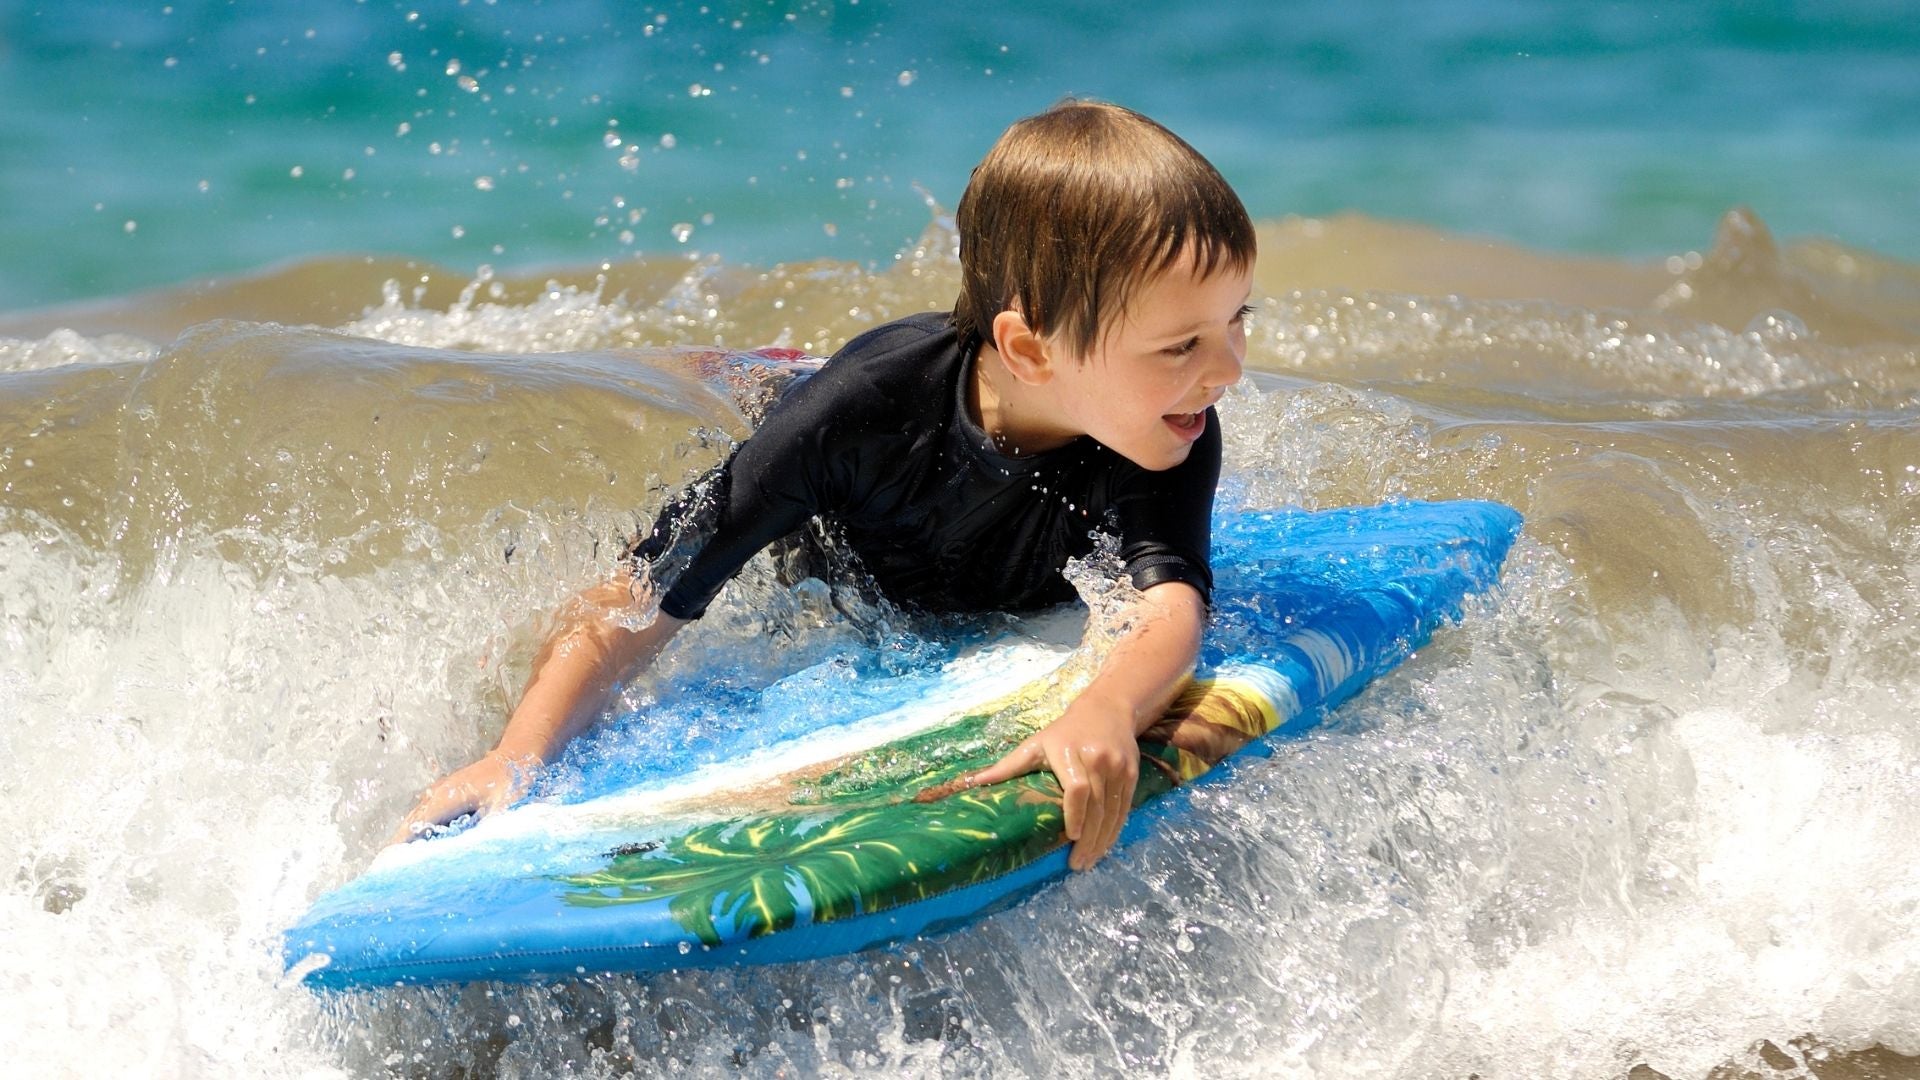 Kids Surfing: How To Teach Your Child To Surf